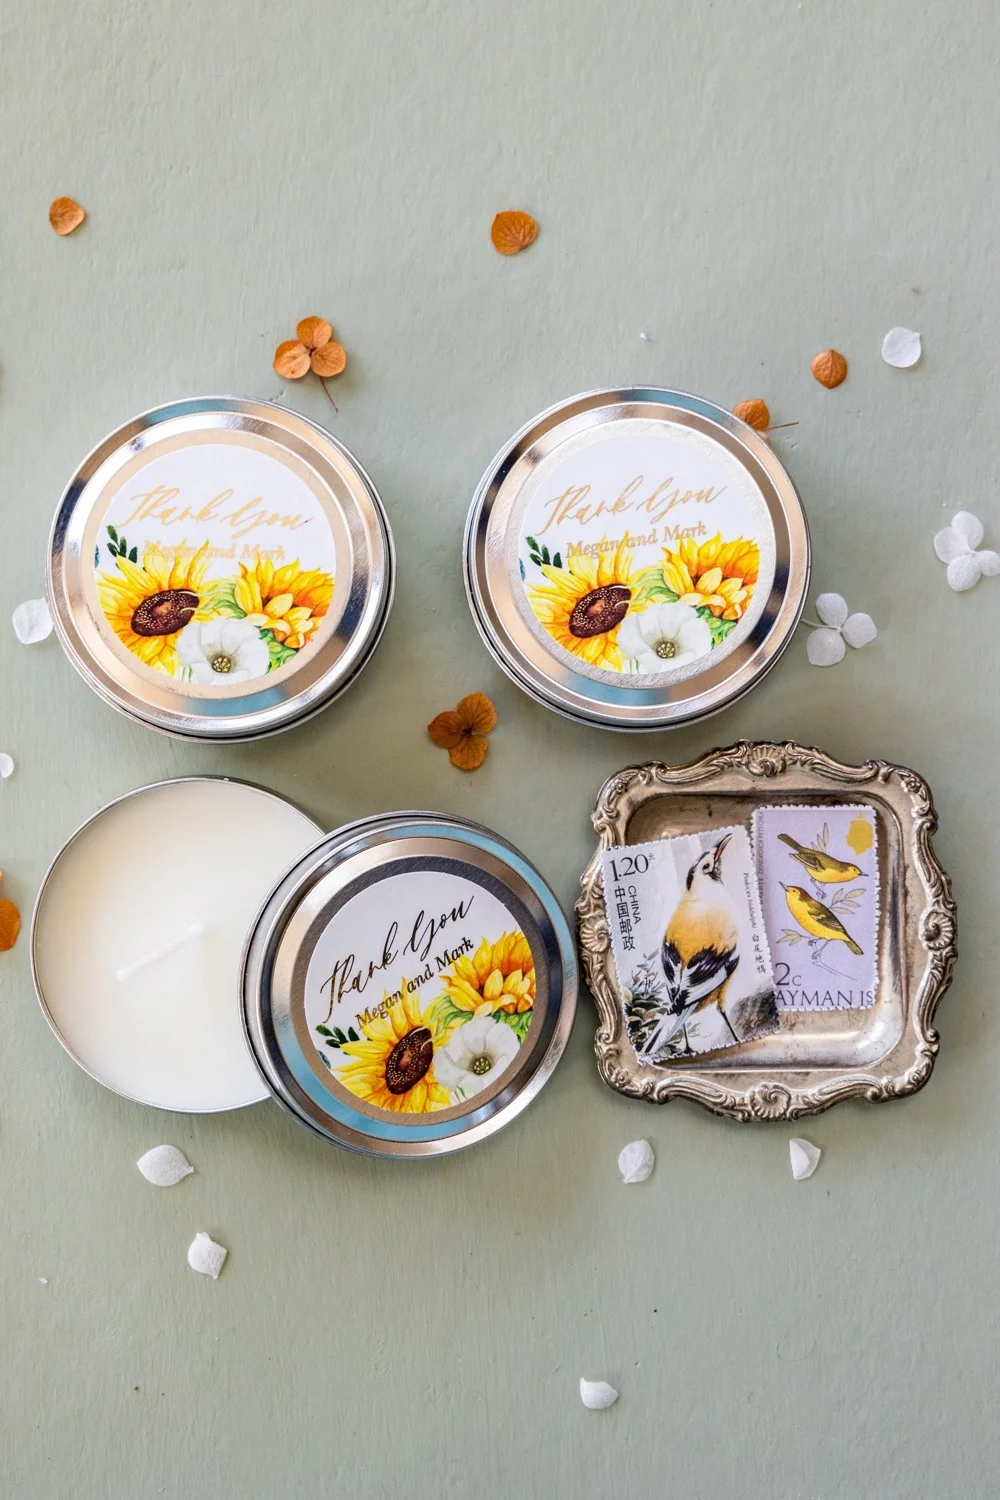 Handmade Soy Wax Candles with Gold Text and Sunflowers - Personalized Gifts for Wedding Guests - T7